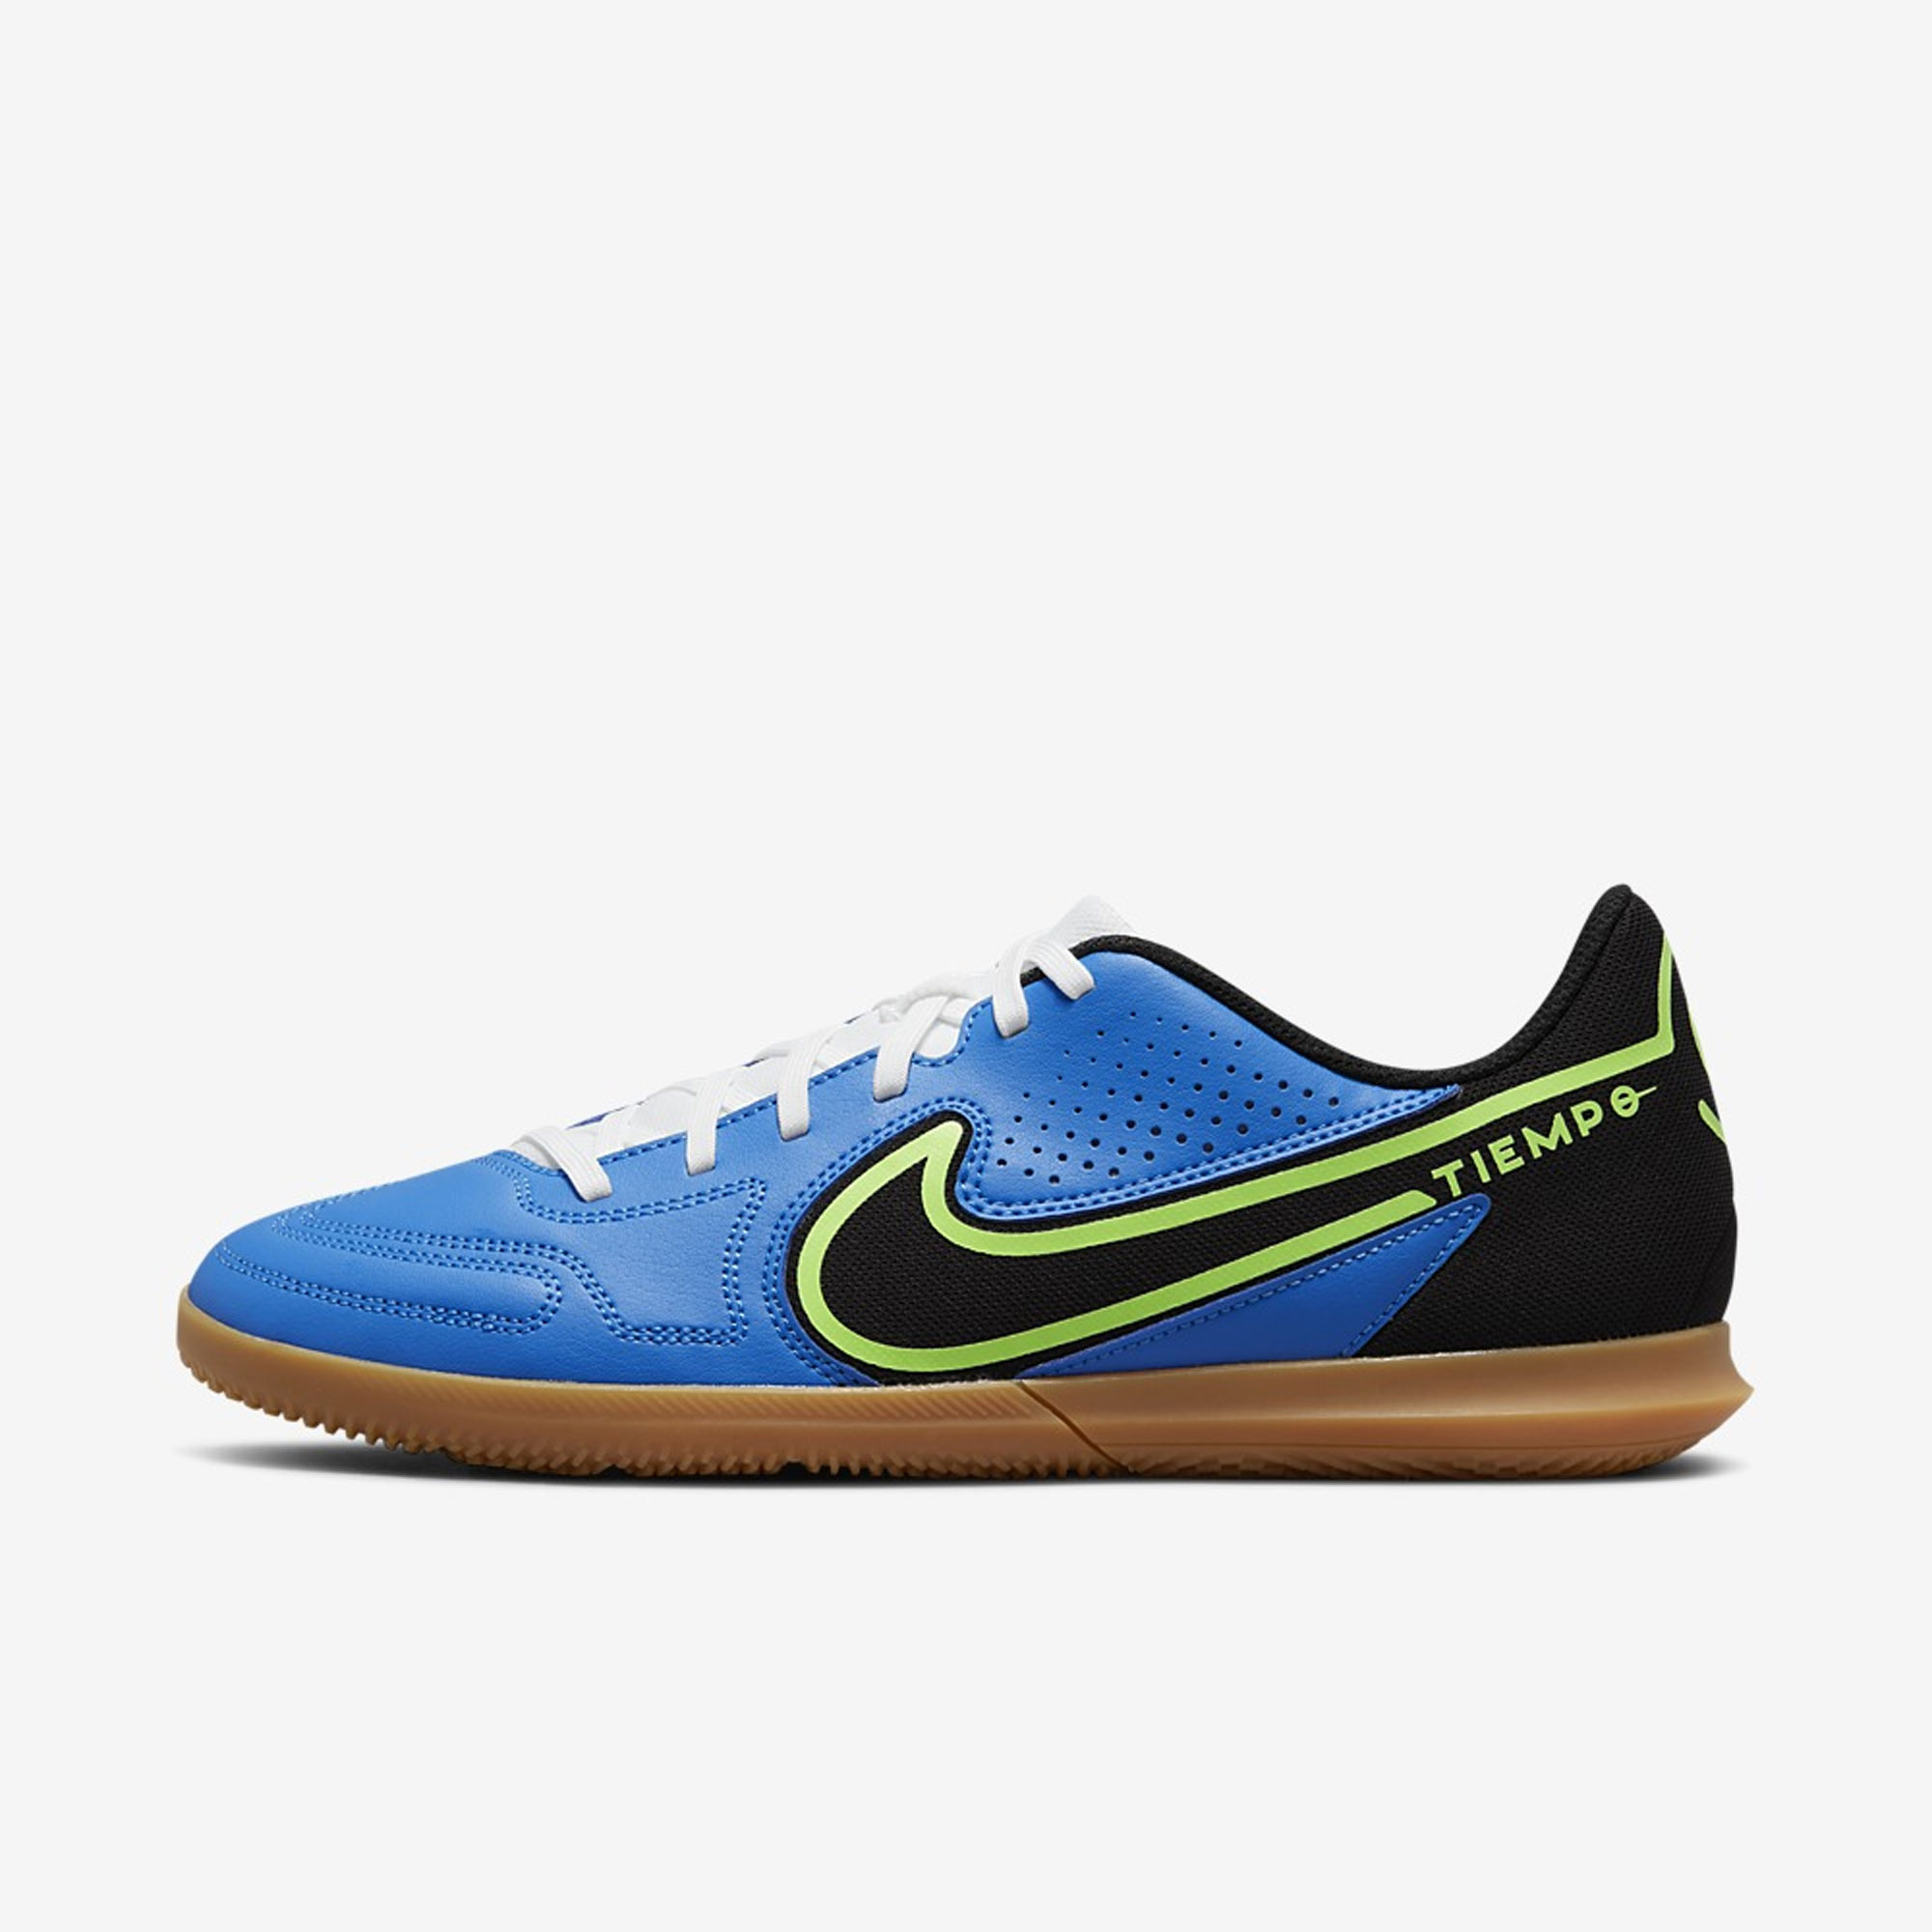 :Nike Tiempo Legend 9 Club IC Indoor Soccer Shoes - Light  Photo Blue / Lime Glow / Gum Medium Brown /